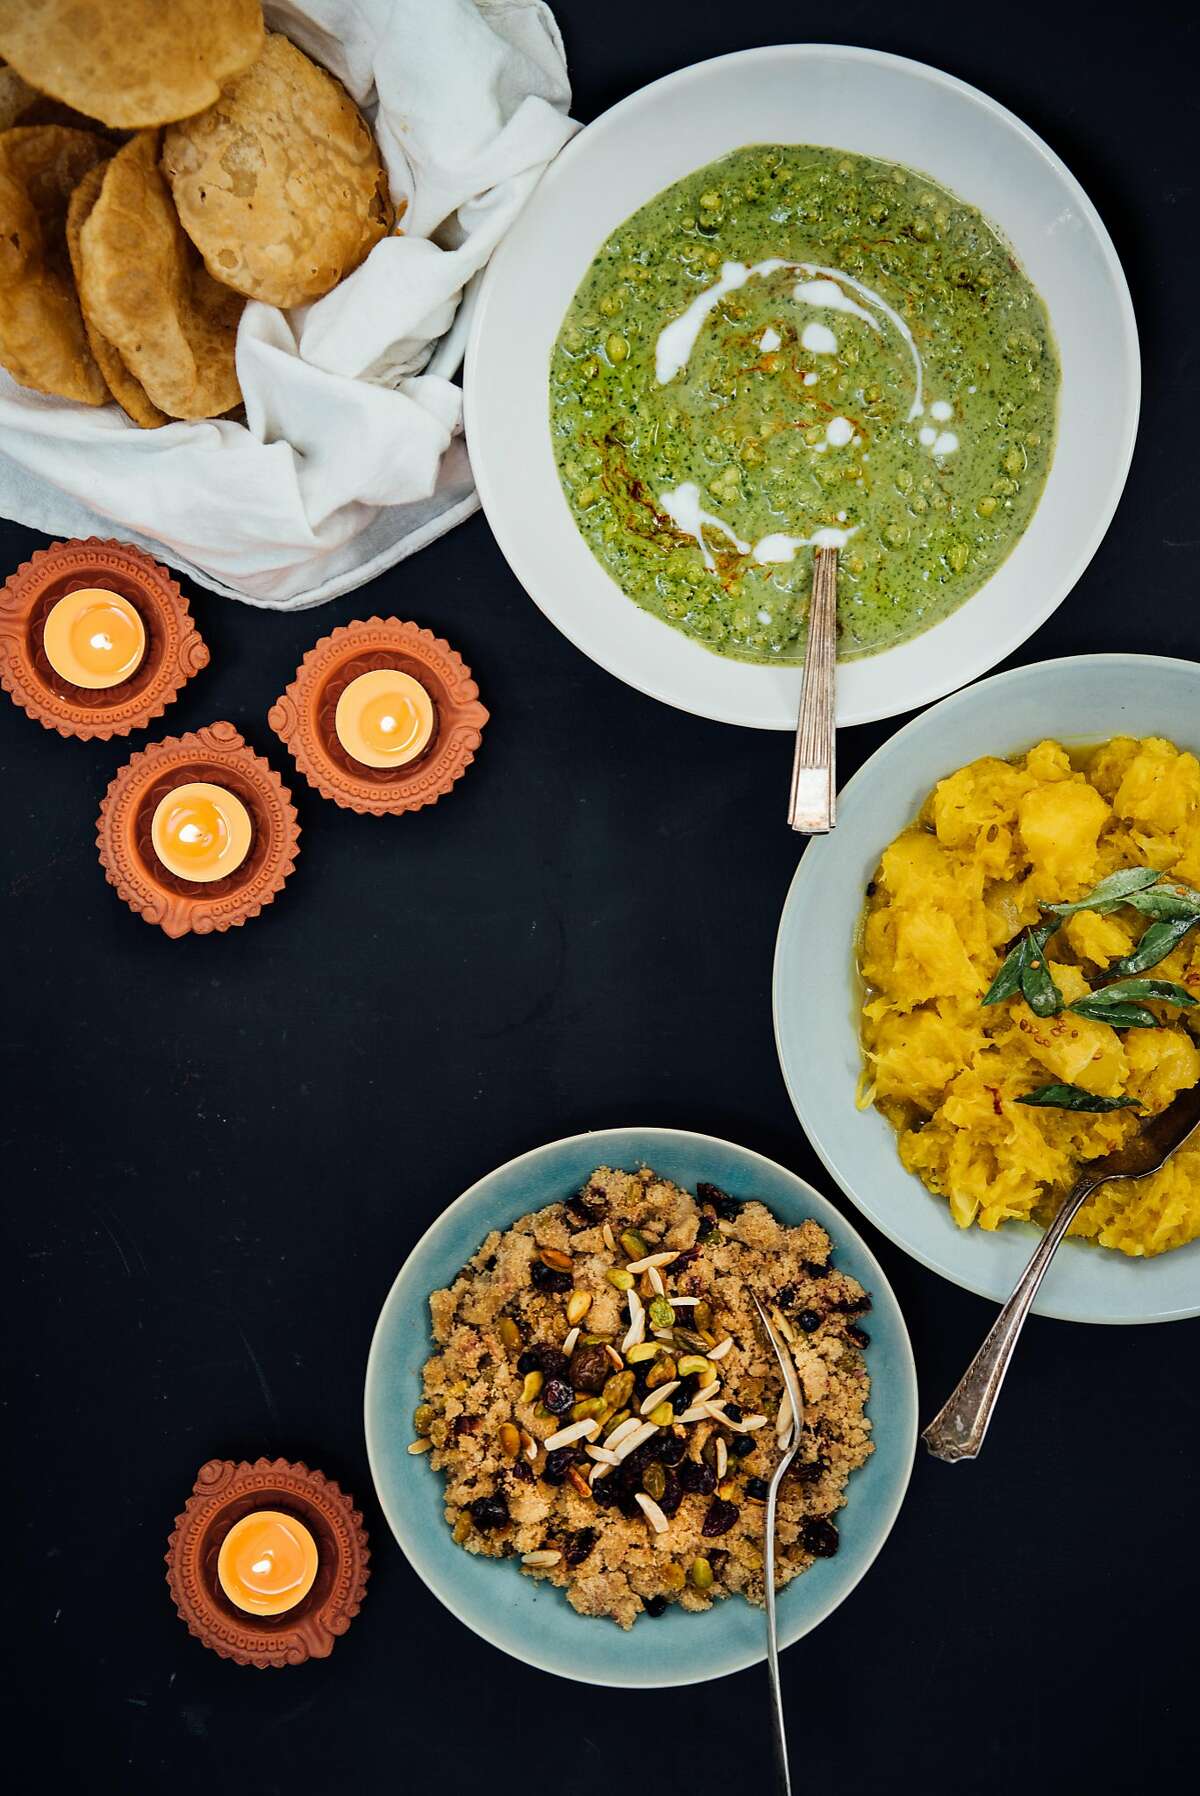 Dishes for a Diwali feast